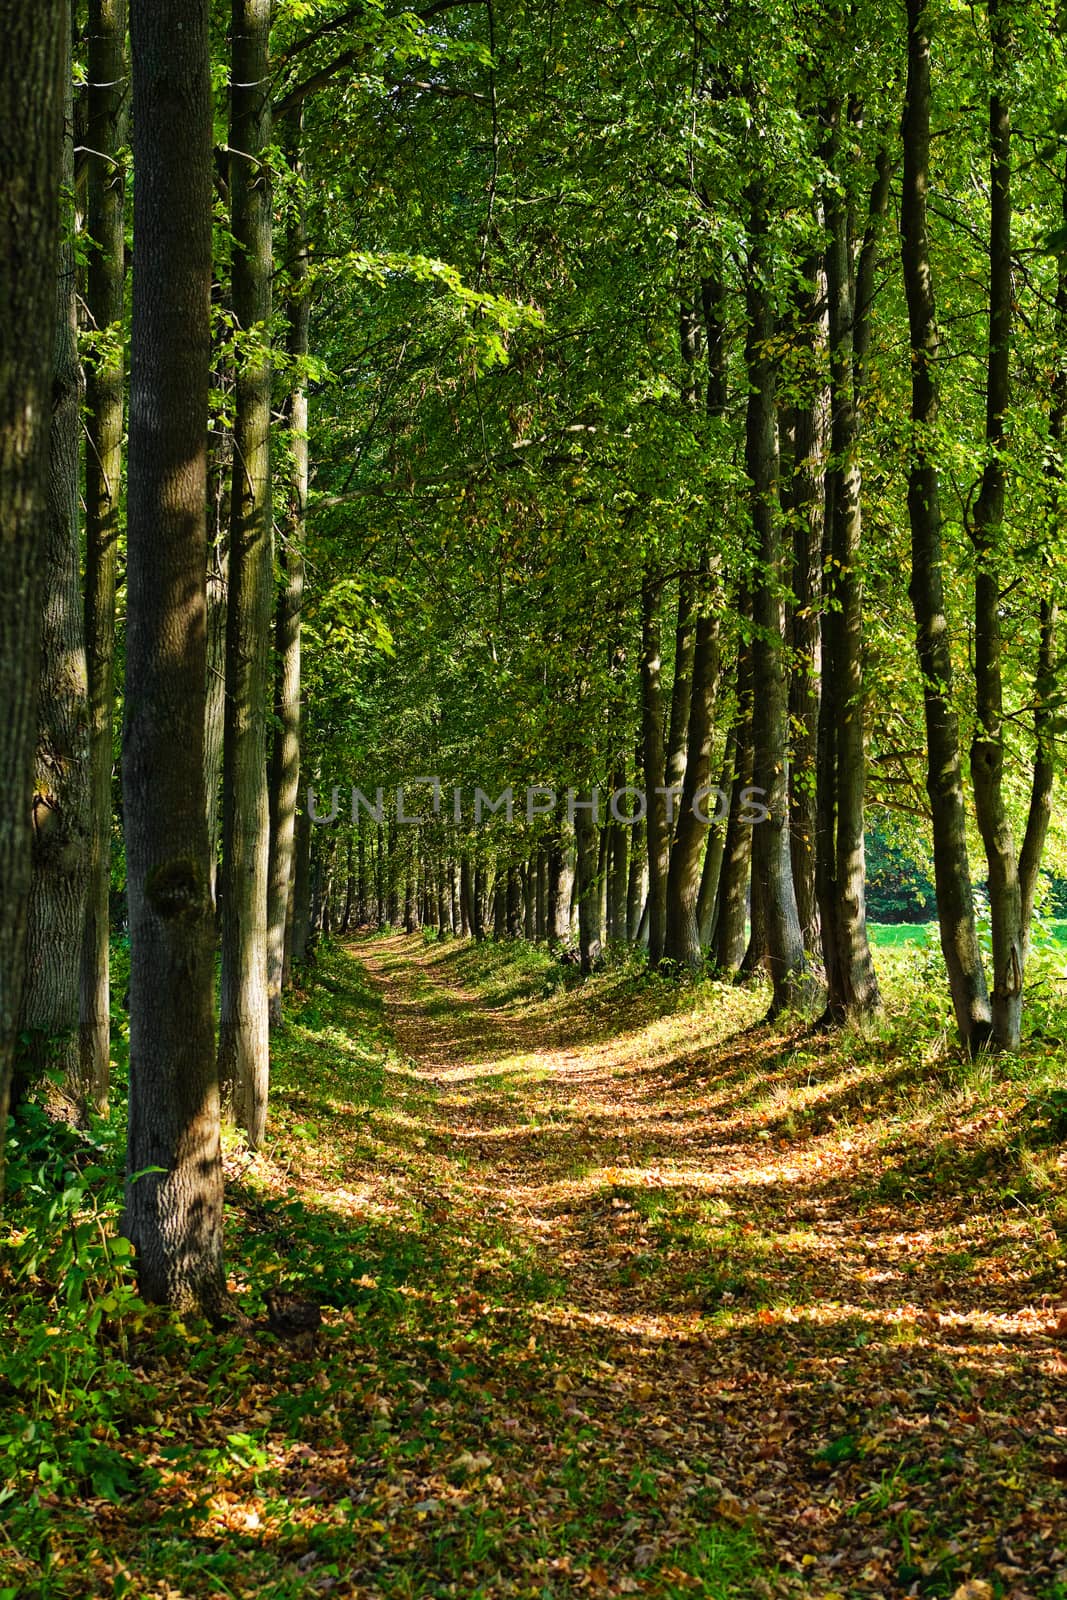 straight path in a dense forest